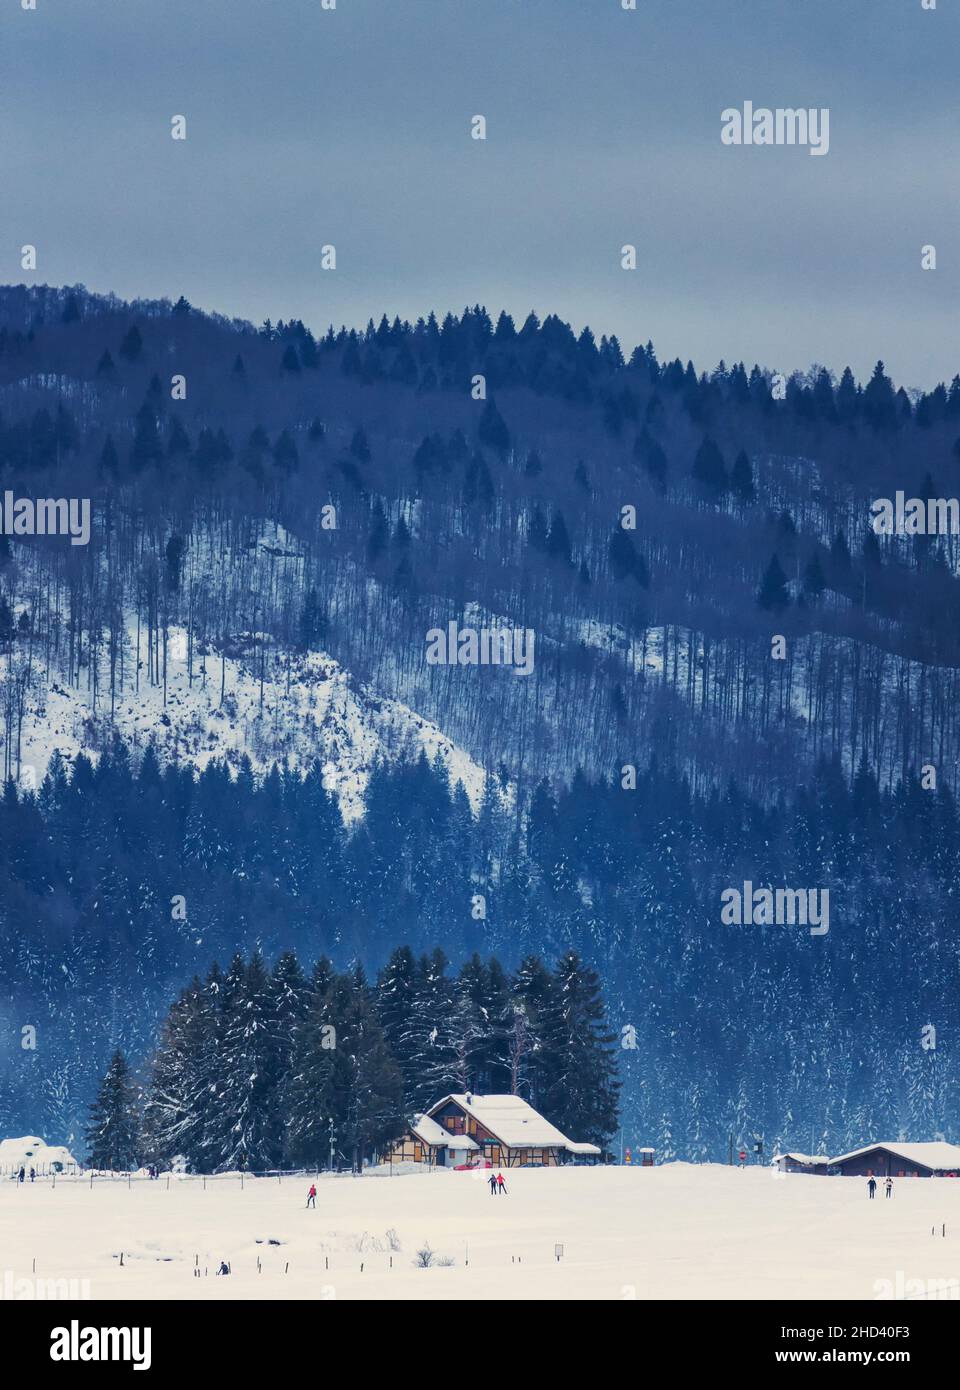 Magic atmosphere from a snowy landscape Stock Photo